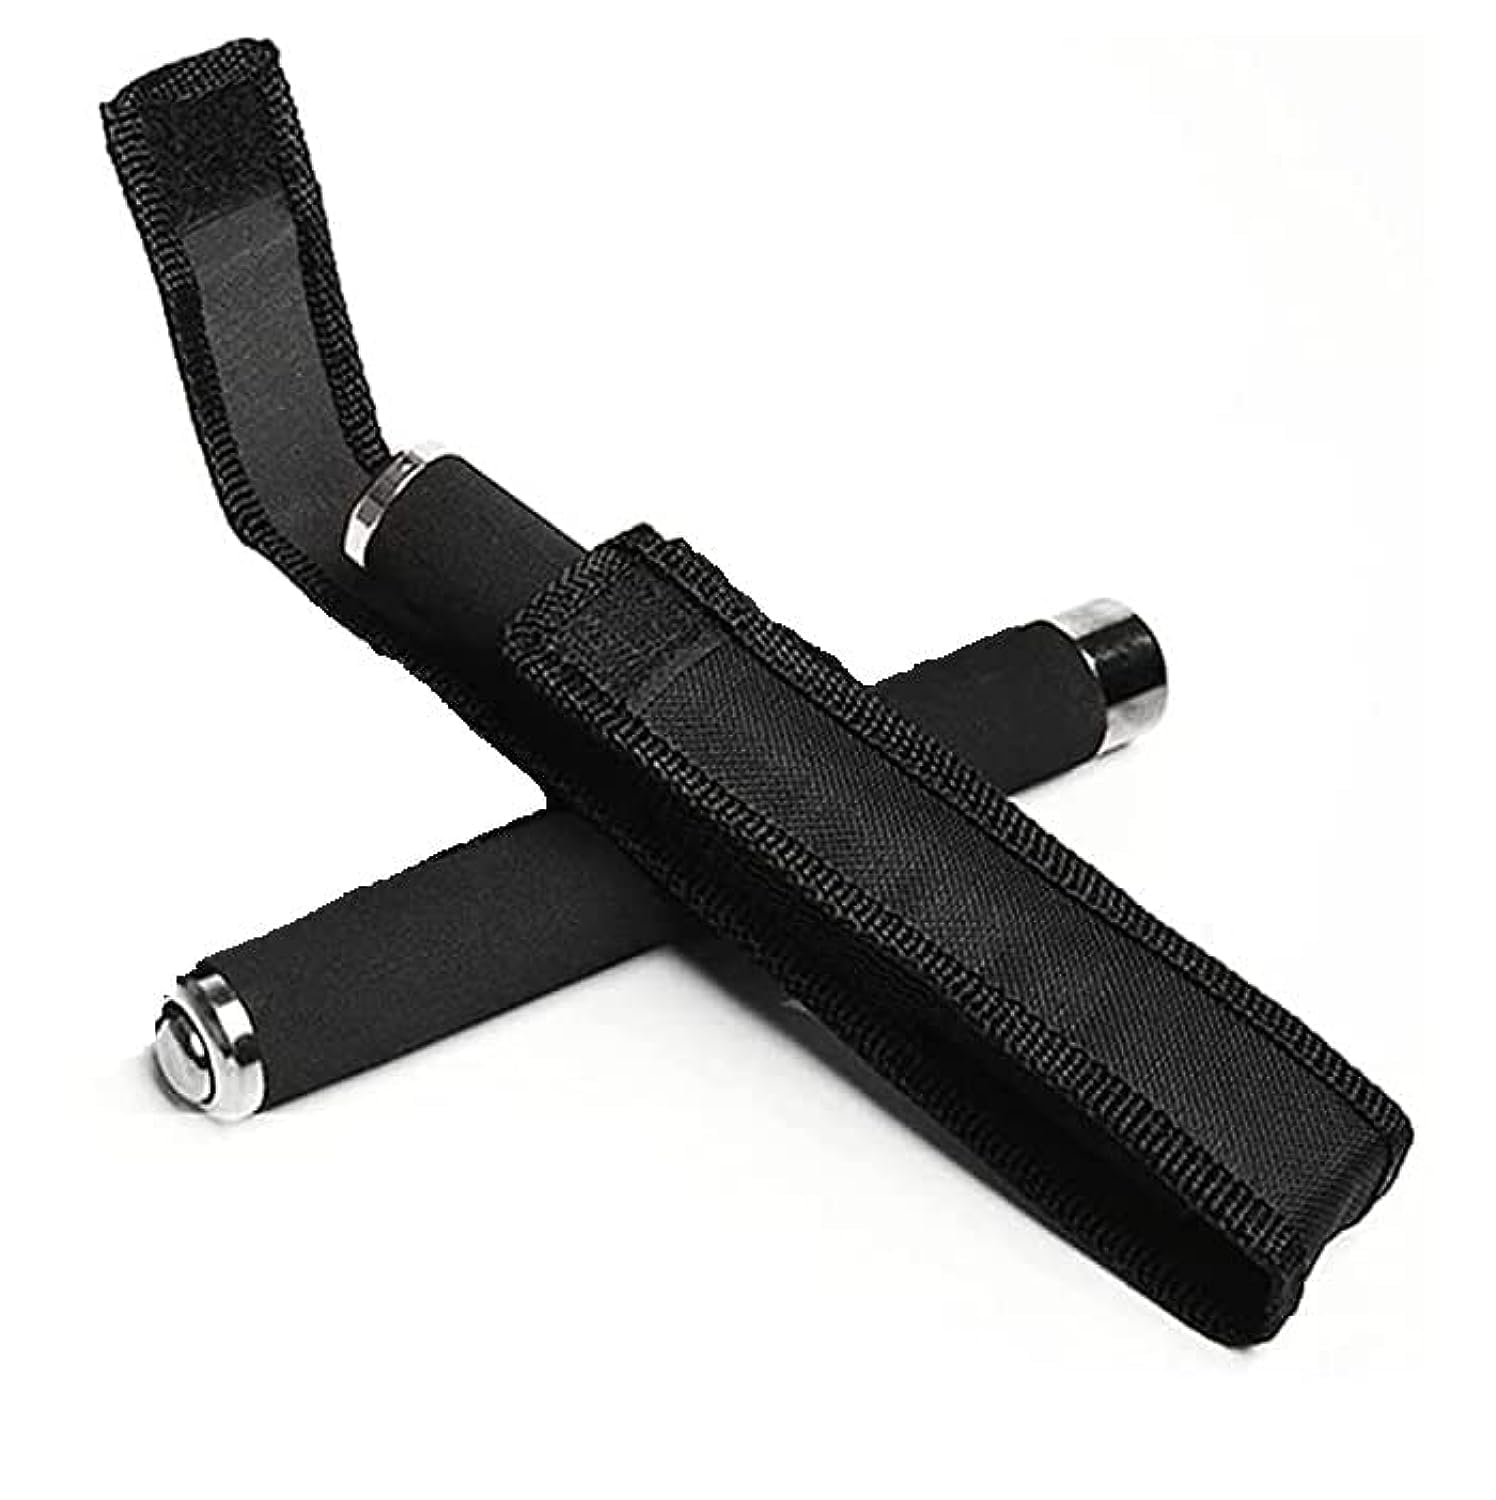 Guardian Safety Stick - Your Reliable Self-Defense Companion